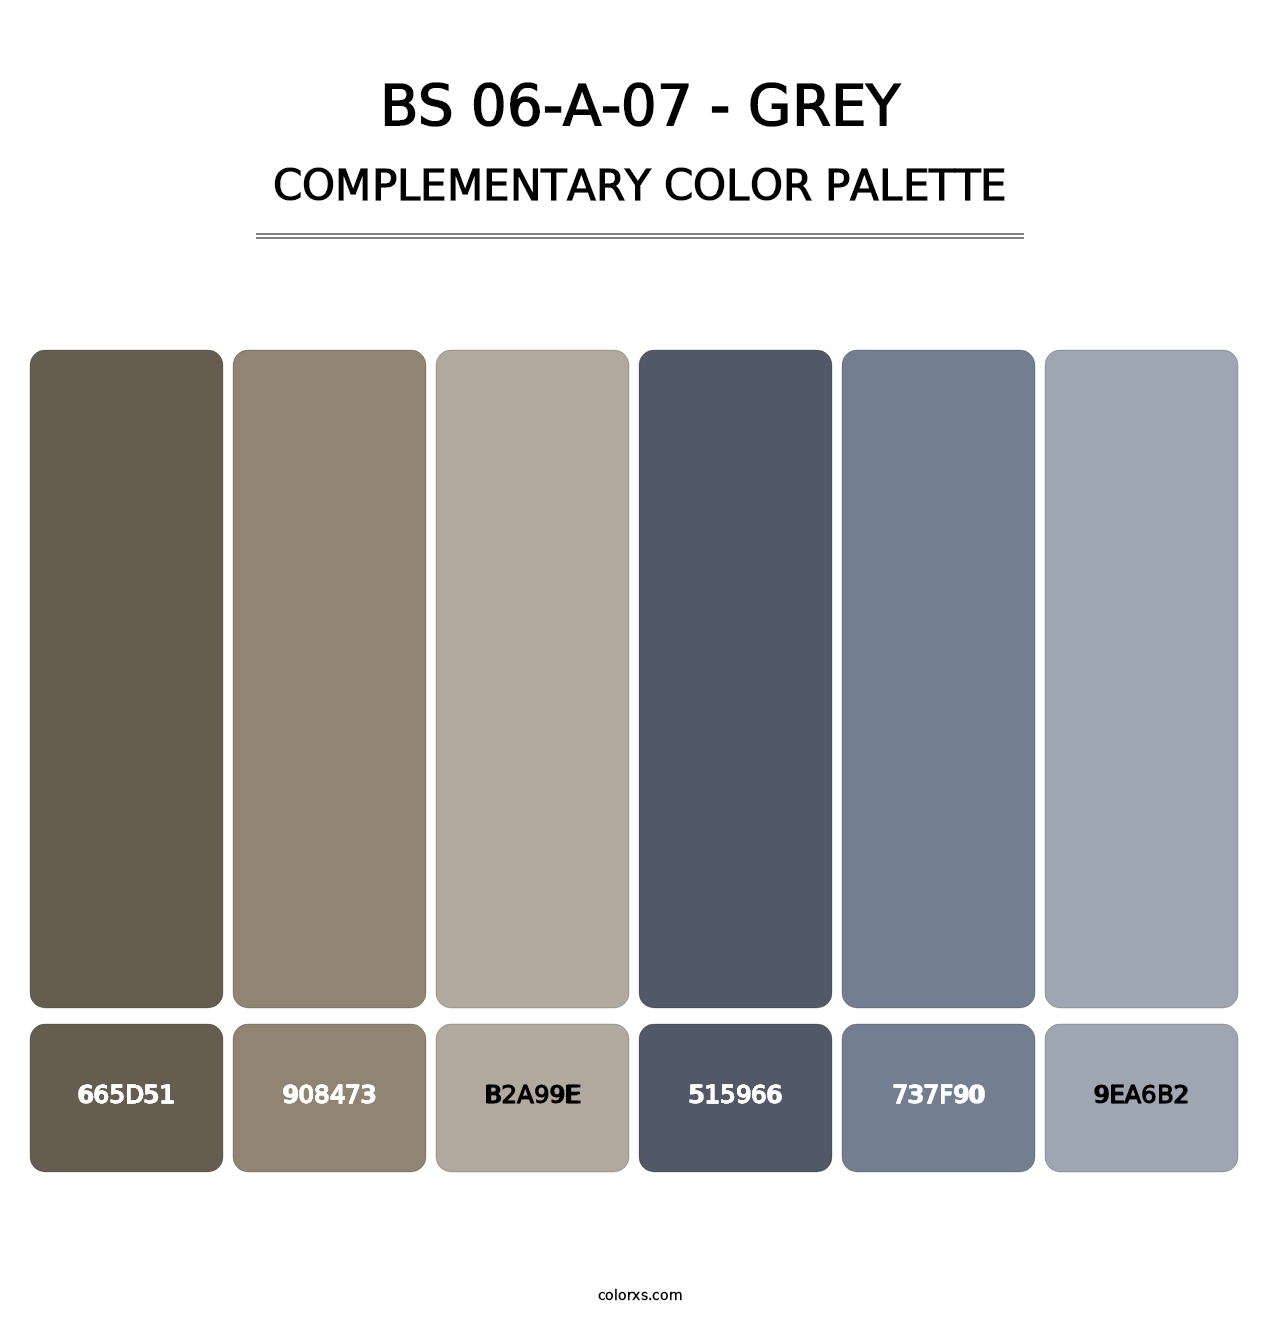 BS 06-A-07 - Grey - Complementary Color Palette